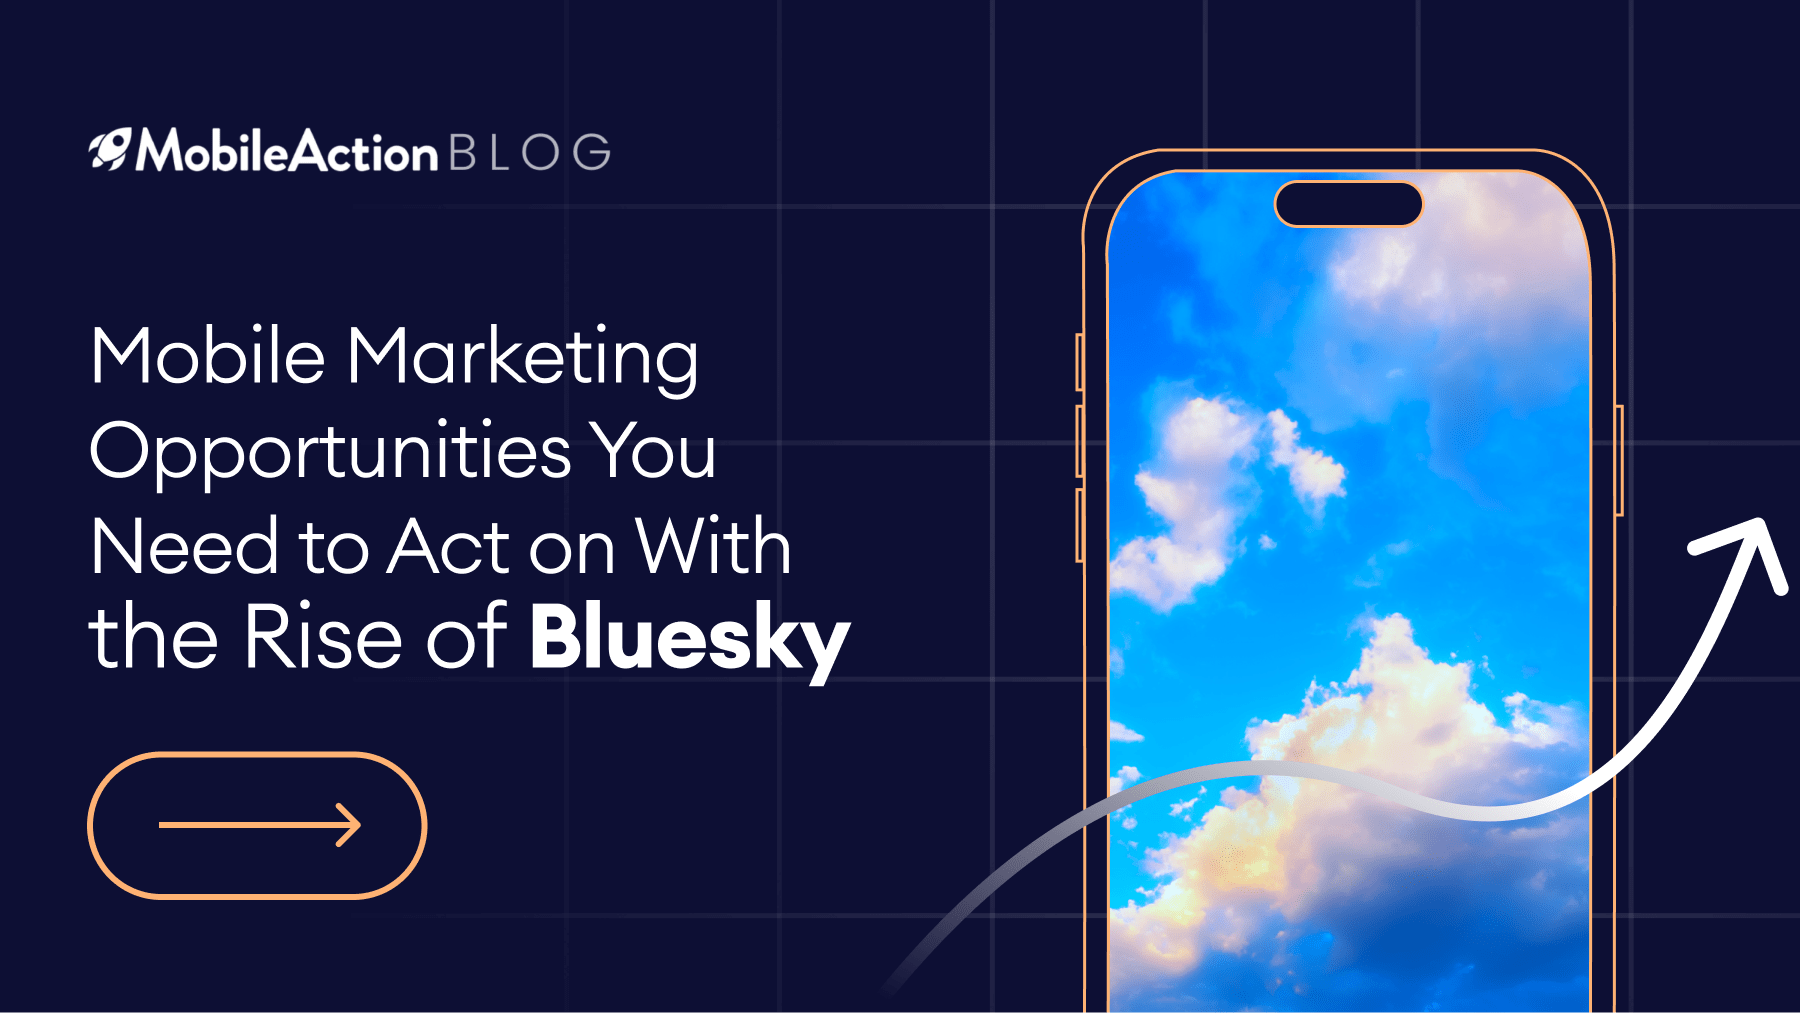 Mobile Marketing Opportunities You Need to Act on With the Rise of Bluesky